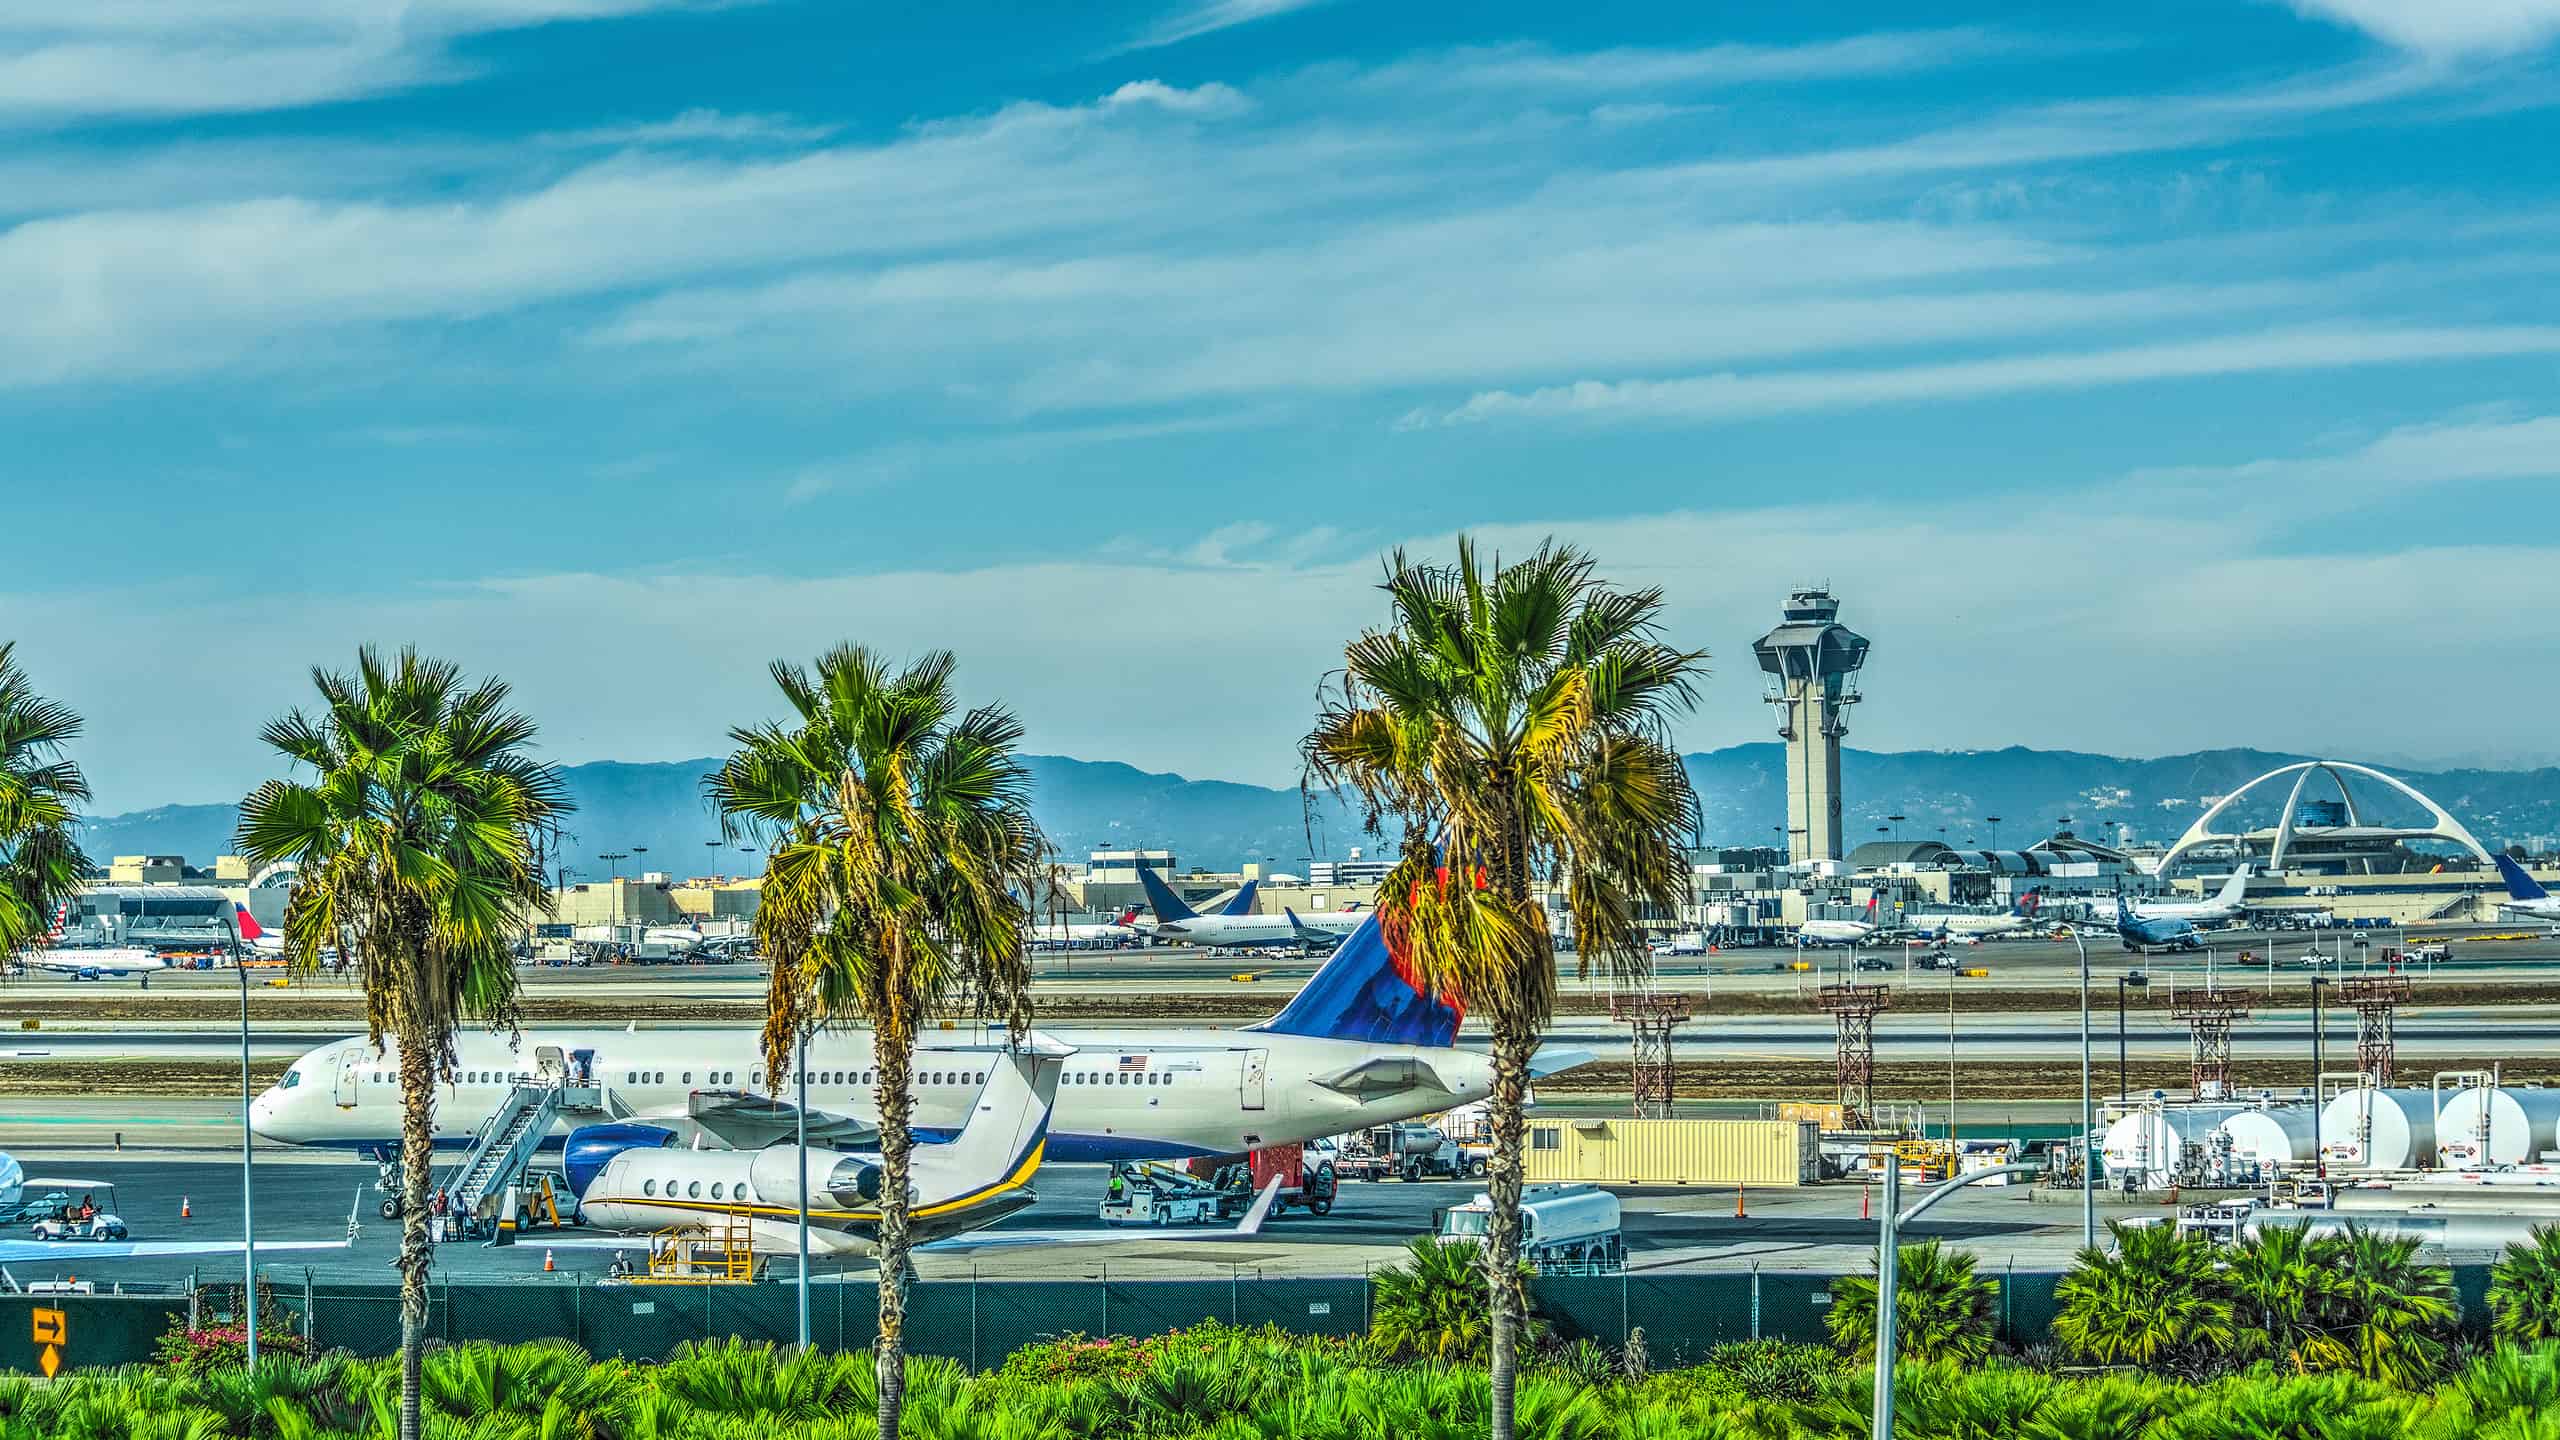 Airplanes in Los Angeles International airport LAX apron. California, USA